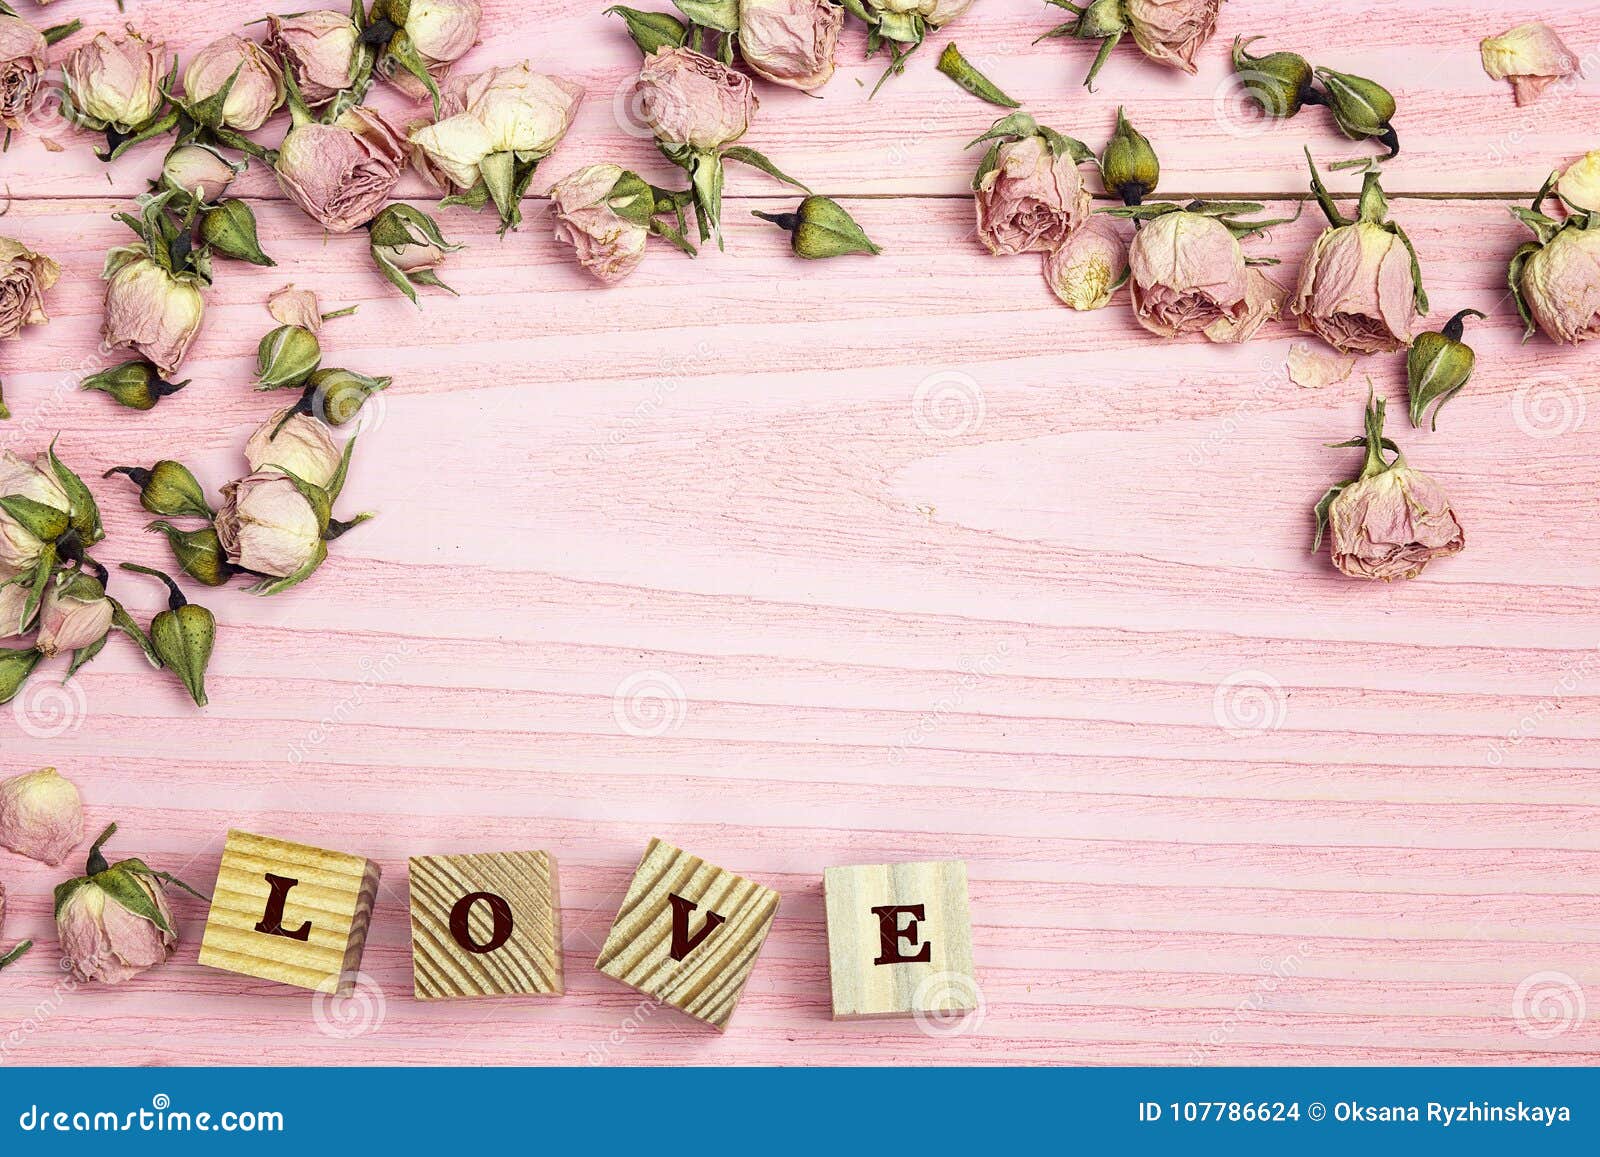 Border Of Rose Flowers And Word Love On The Pink Wooden Background With ...